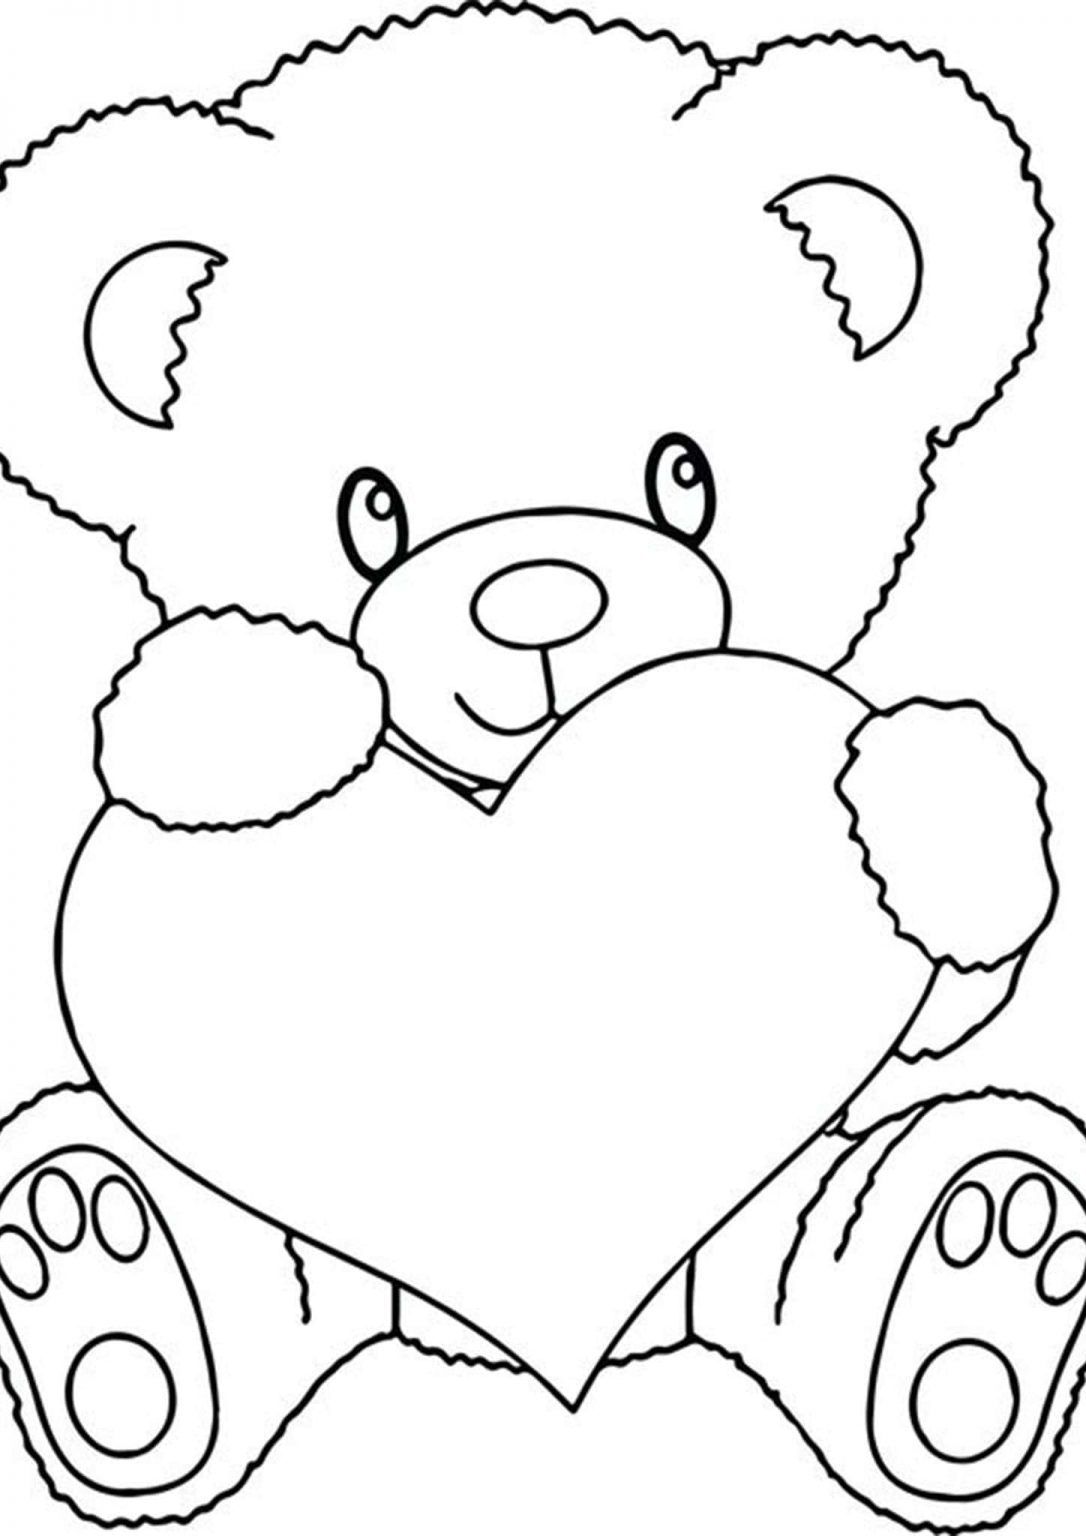 Free easy to print bear coloring pages valentine coloring pages teddy bear coloring pages bear coloring pages